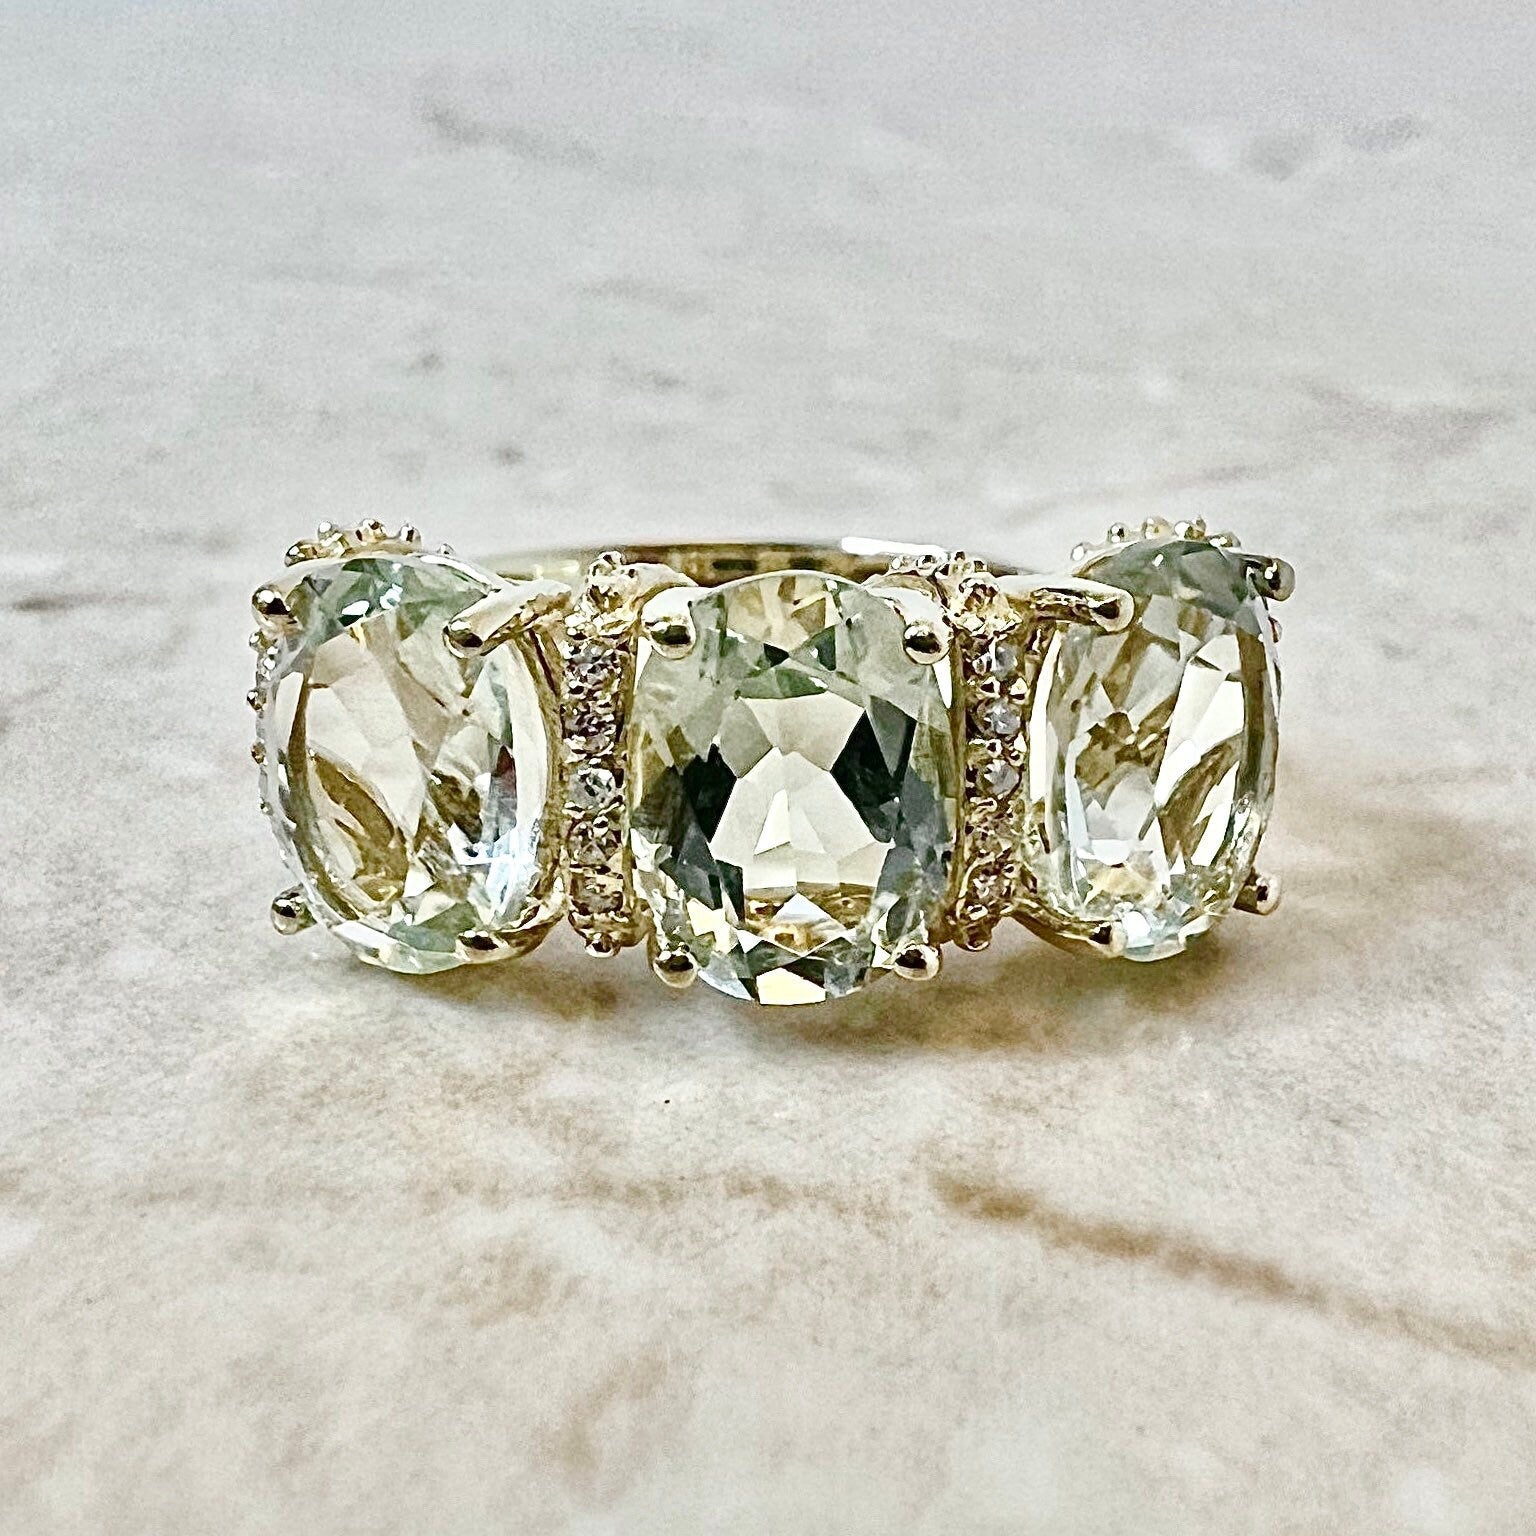 Emerald Stone Ring | Gold Ring Designs